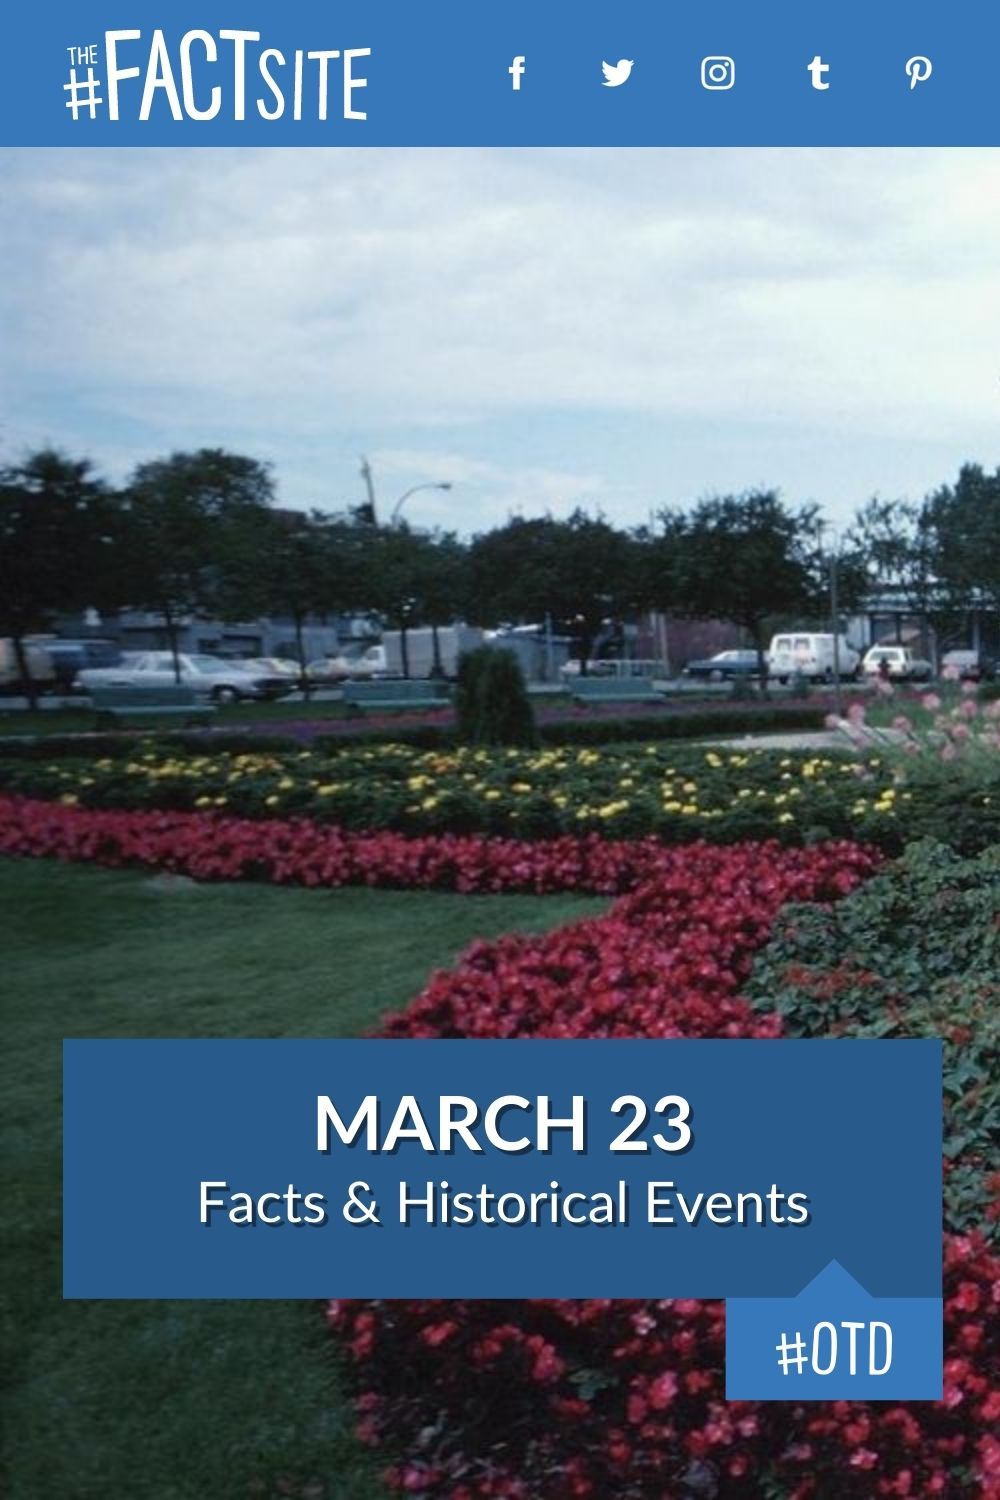 March 23: Facts & Historical Events On This Day